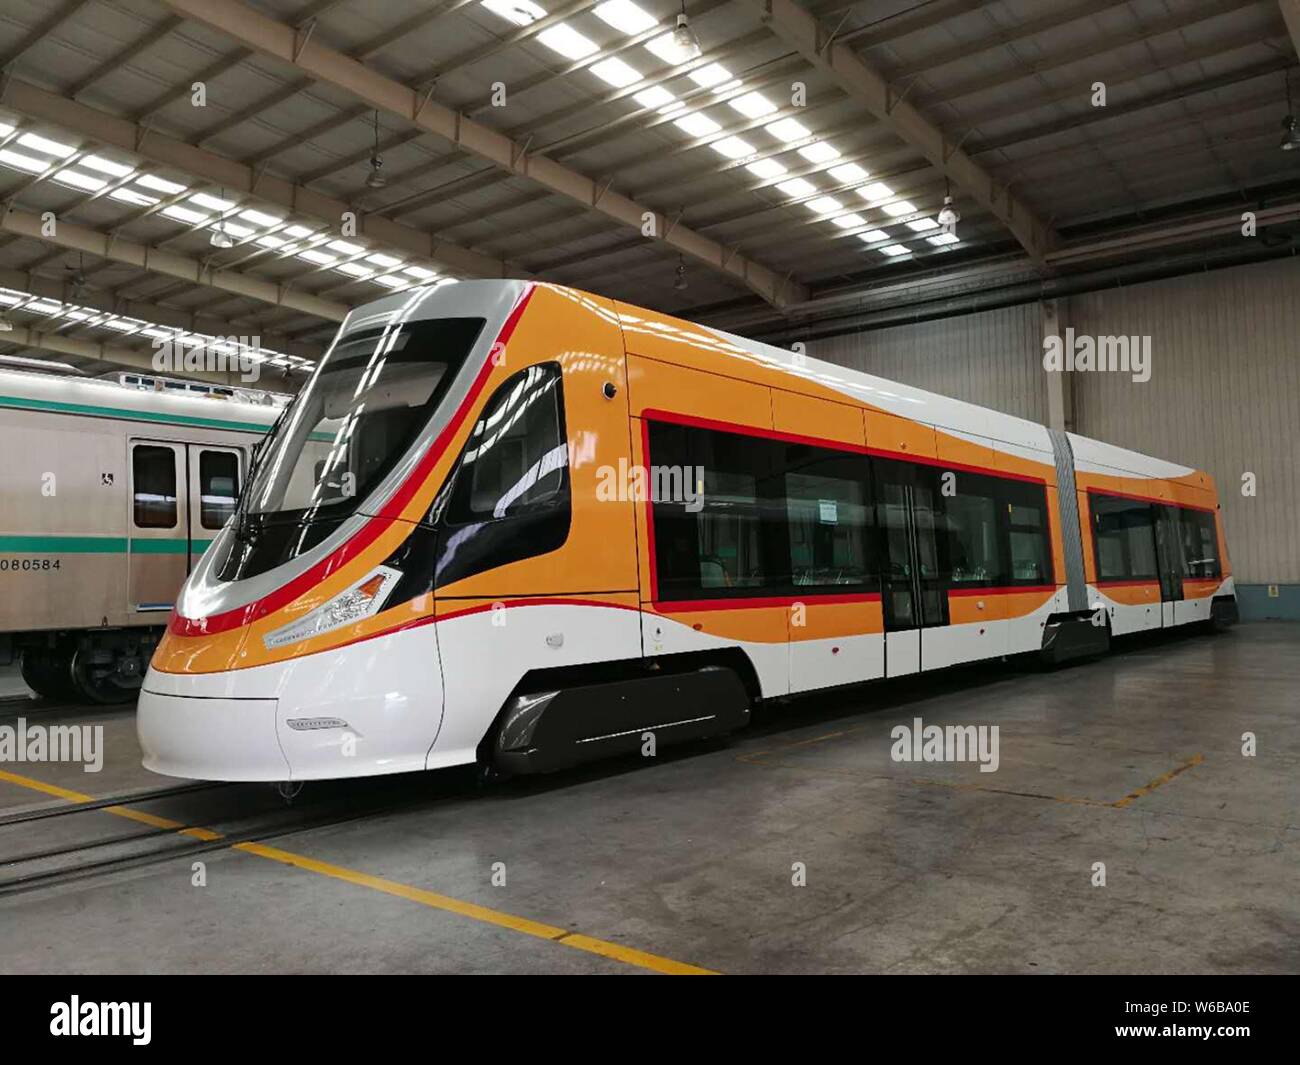 A super hybrid-powered tramcar to be the first tram put into use in the Qinghai-Tibet Plateau is pictured during the off-line ceremony at CRRC Qingdao Stock Photo